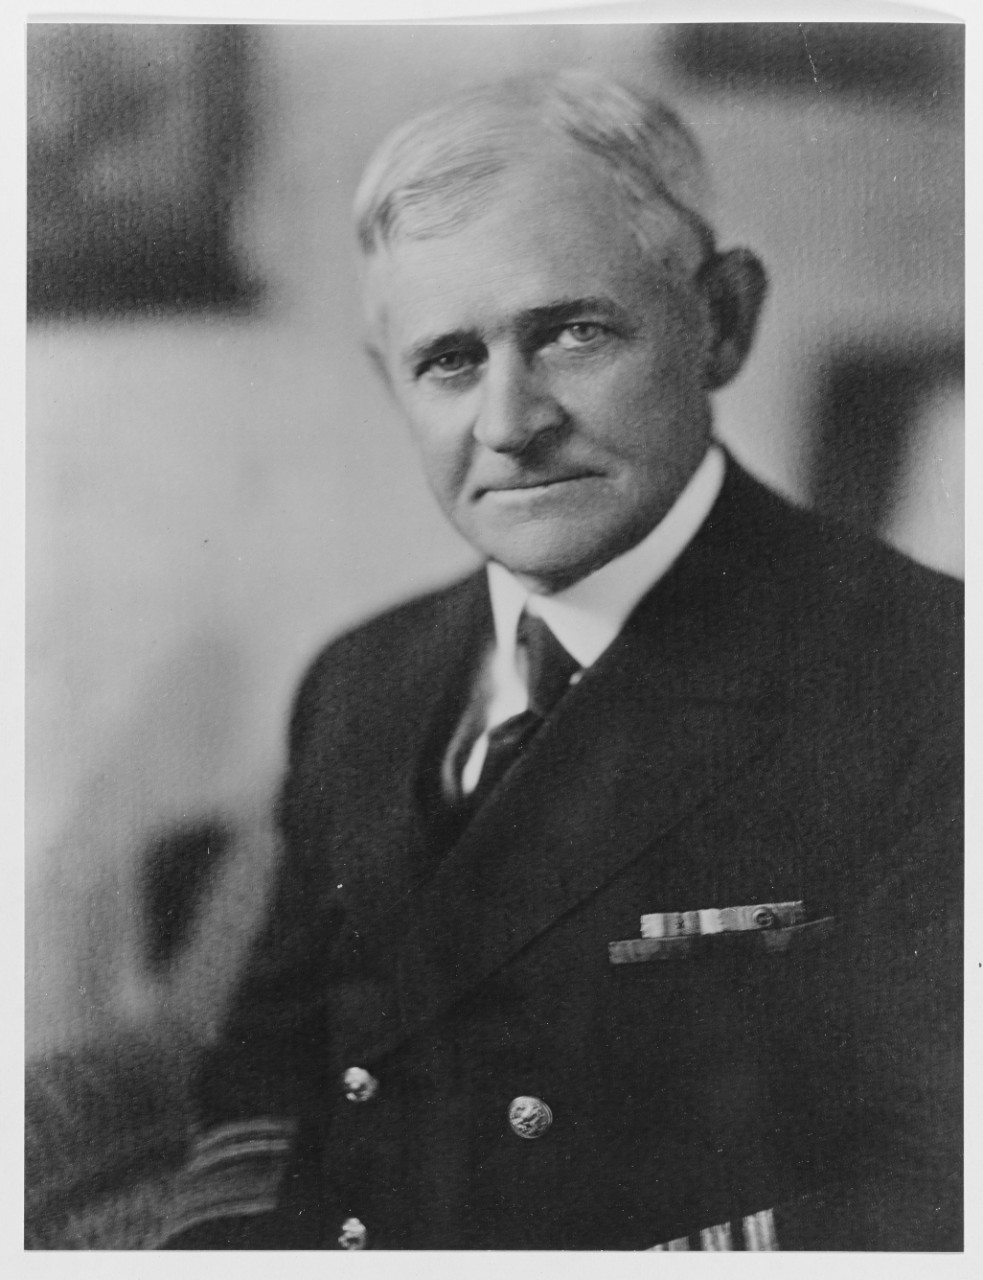 Rear Admiral H.A. Wiley USN